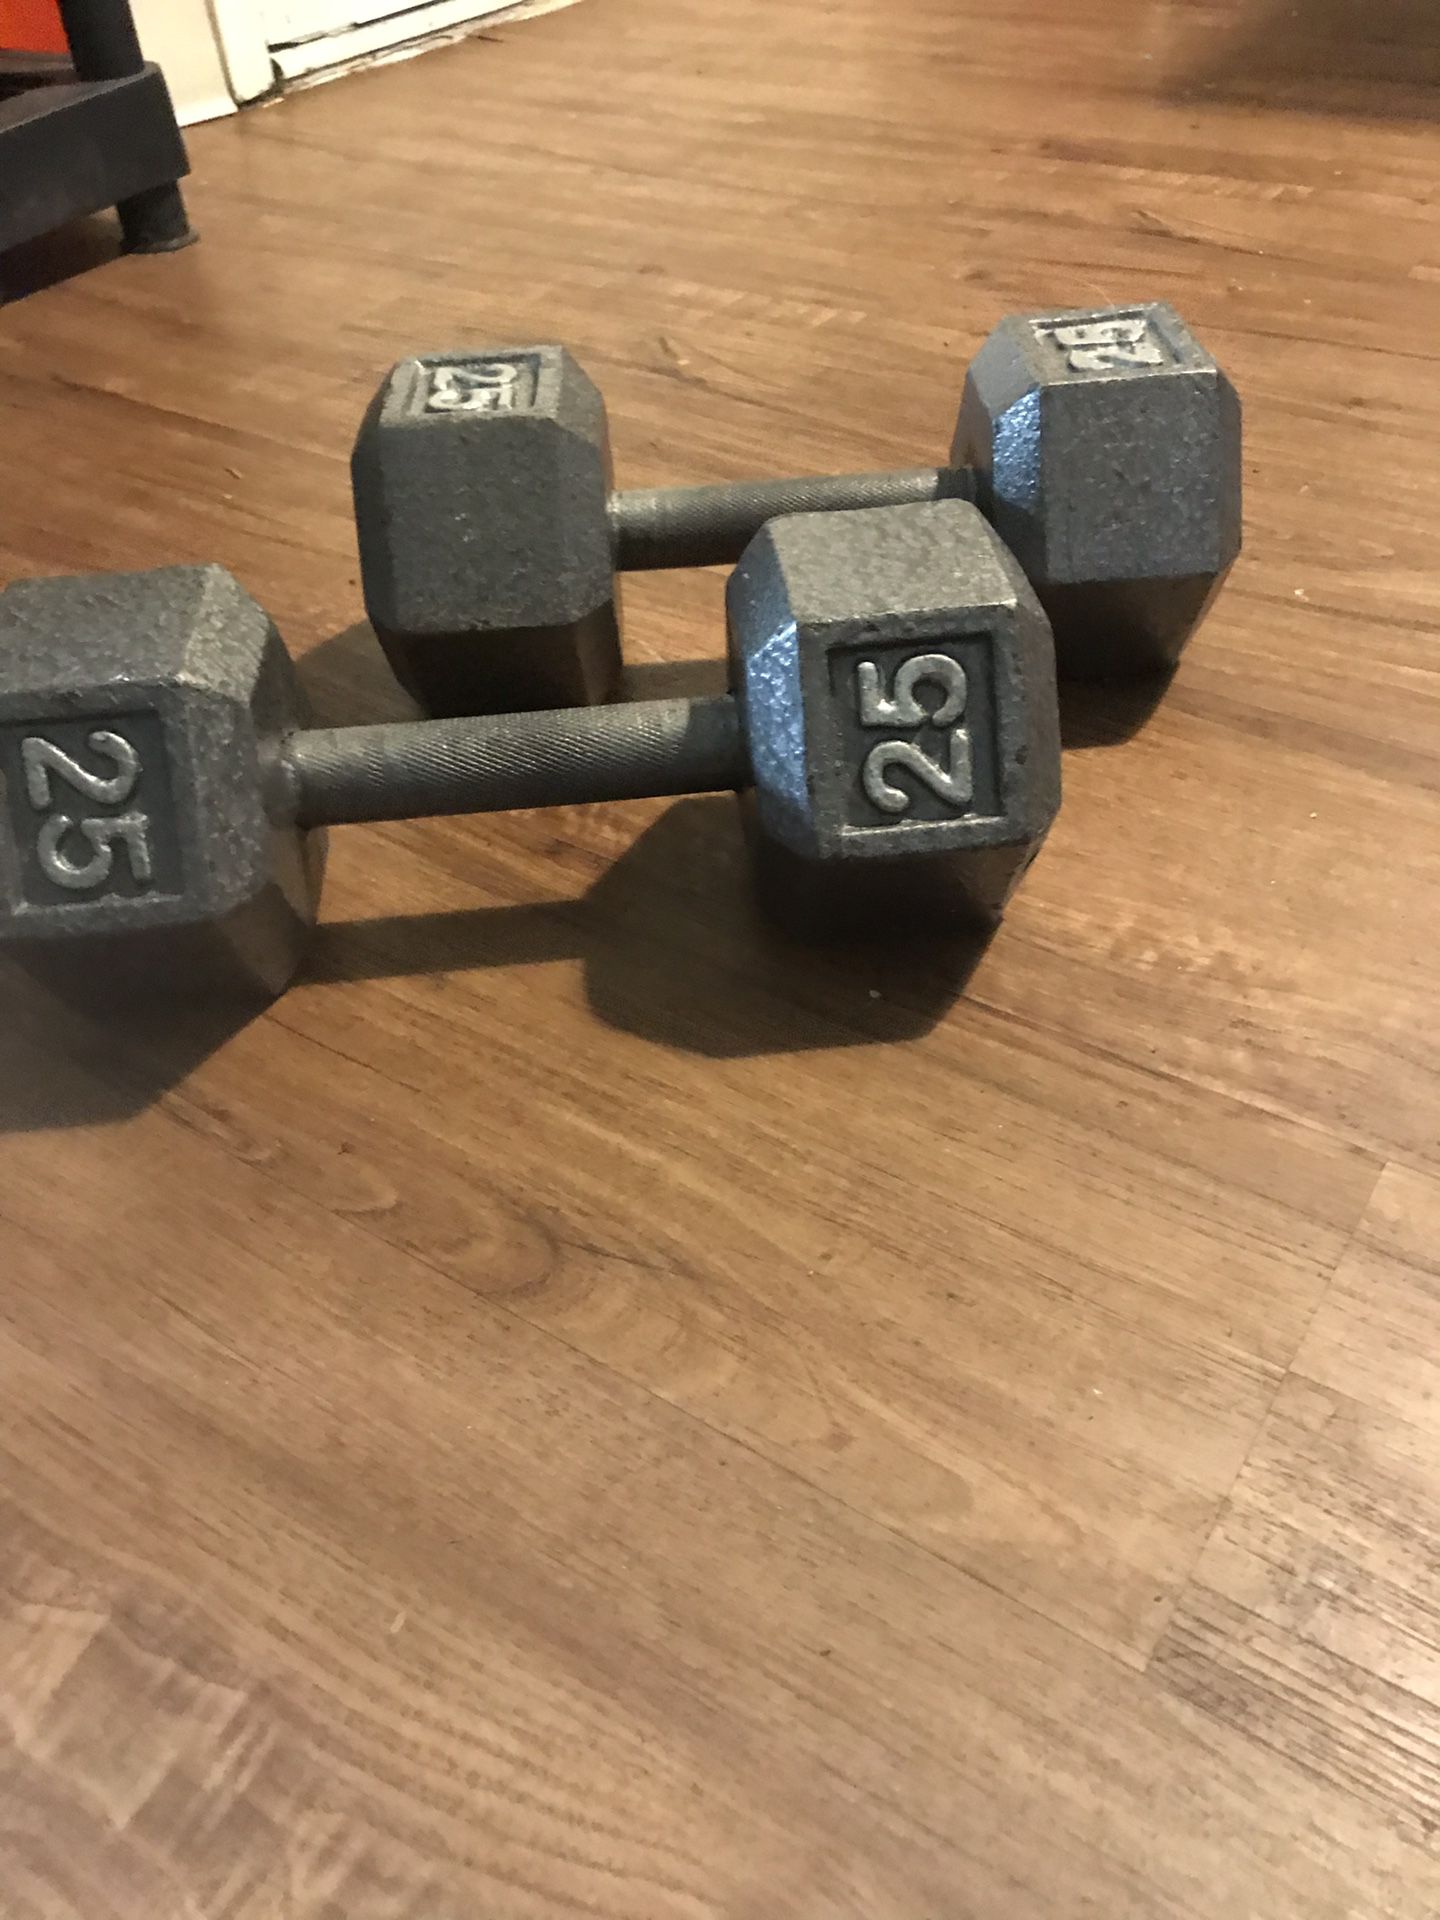 Hand held 25 lb each weights